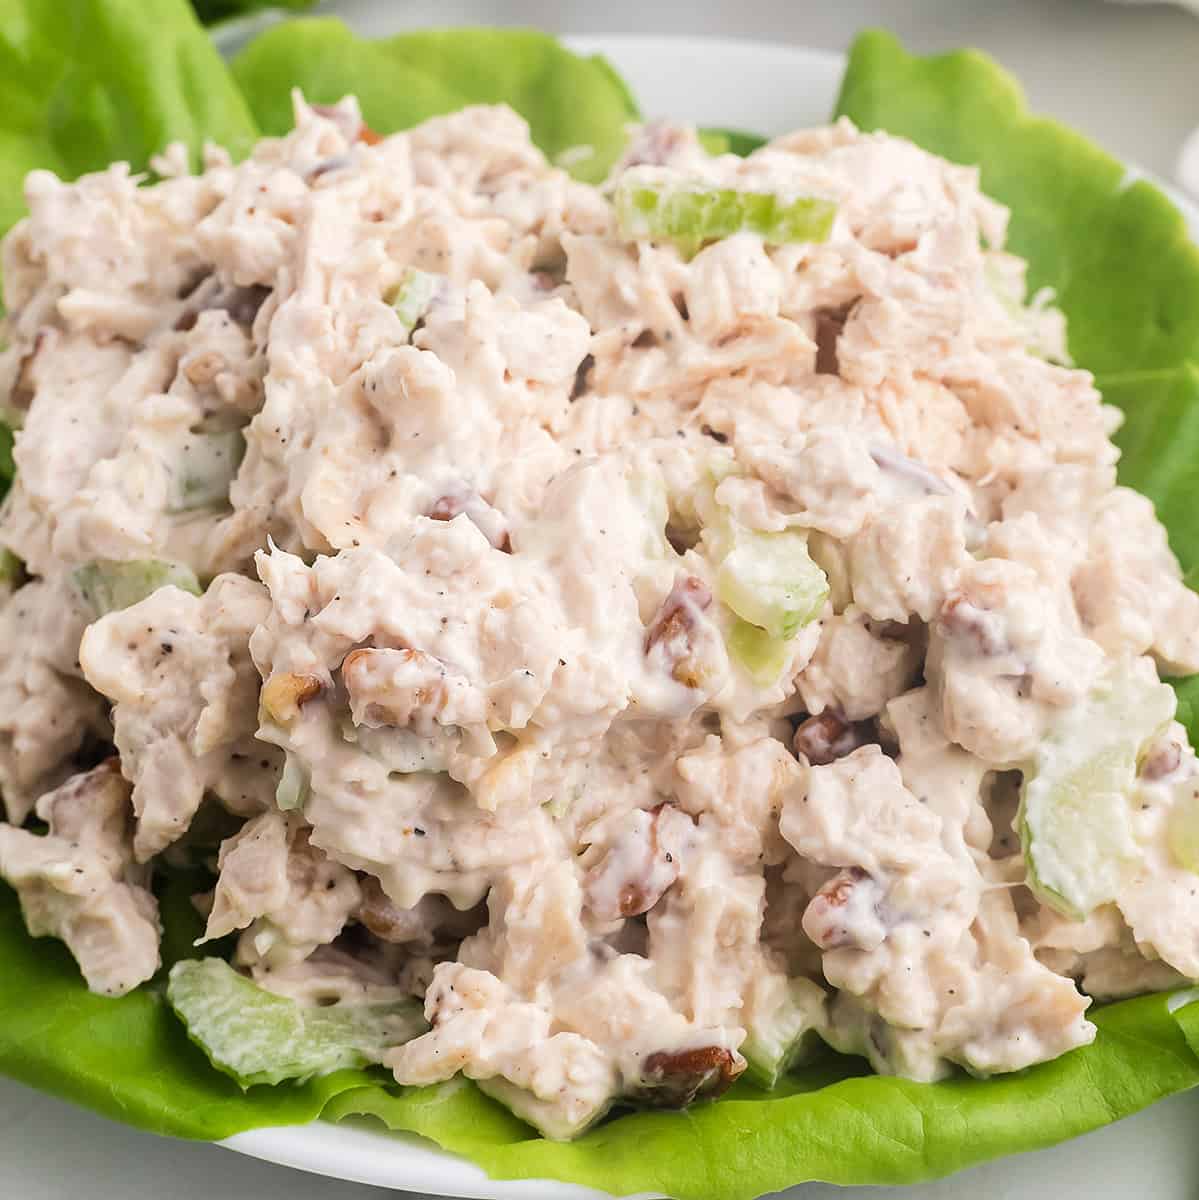 A mound of chicken salad on a lettuce lined plate.